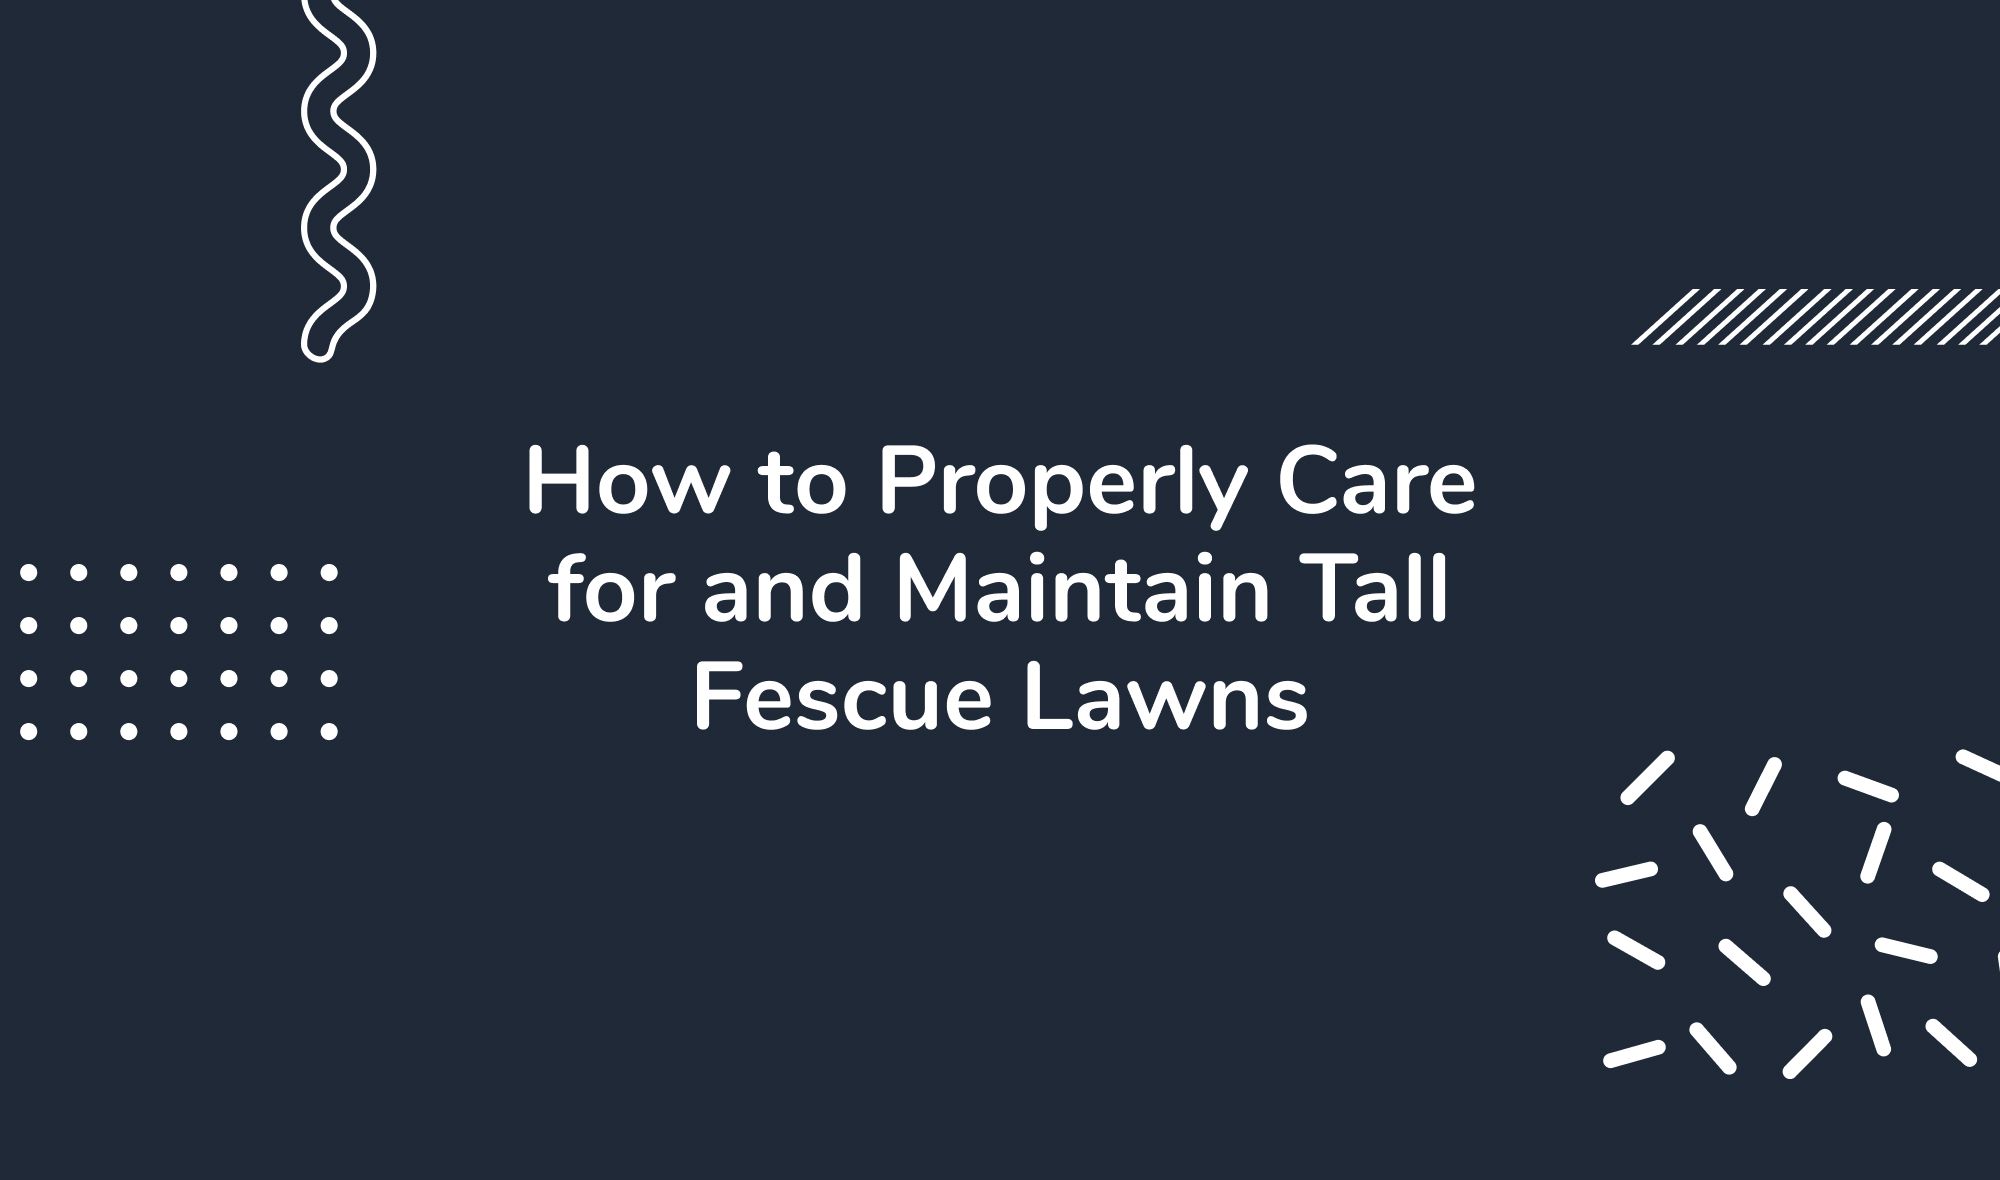 How to Properly Care for and Maintain Tall Fescue Lawns